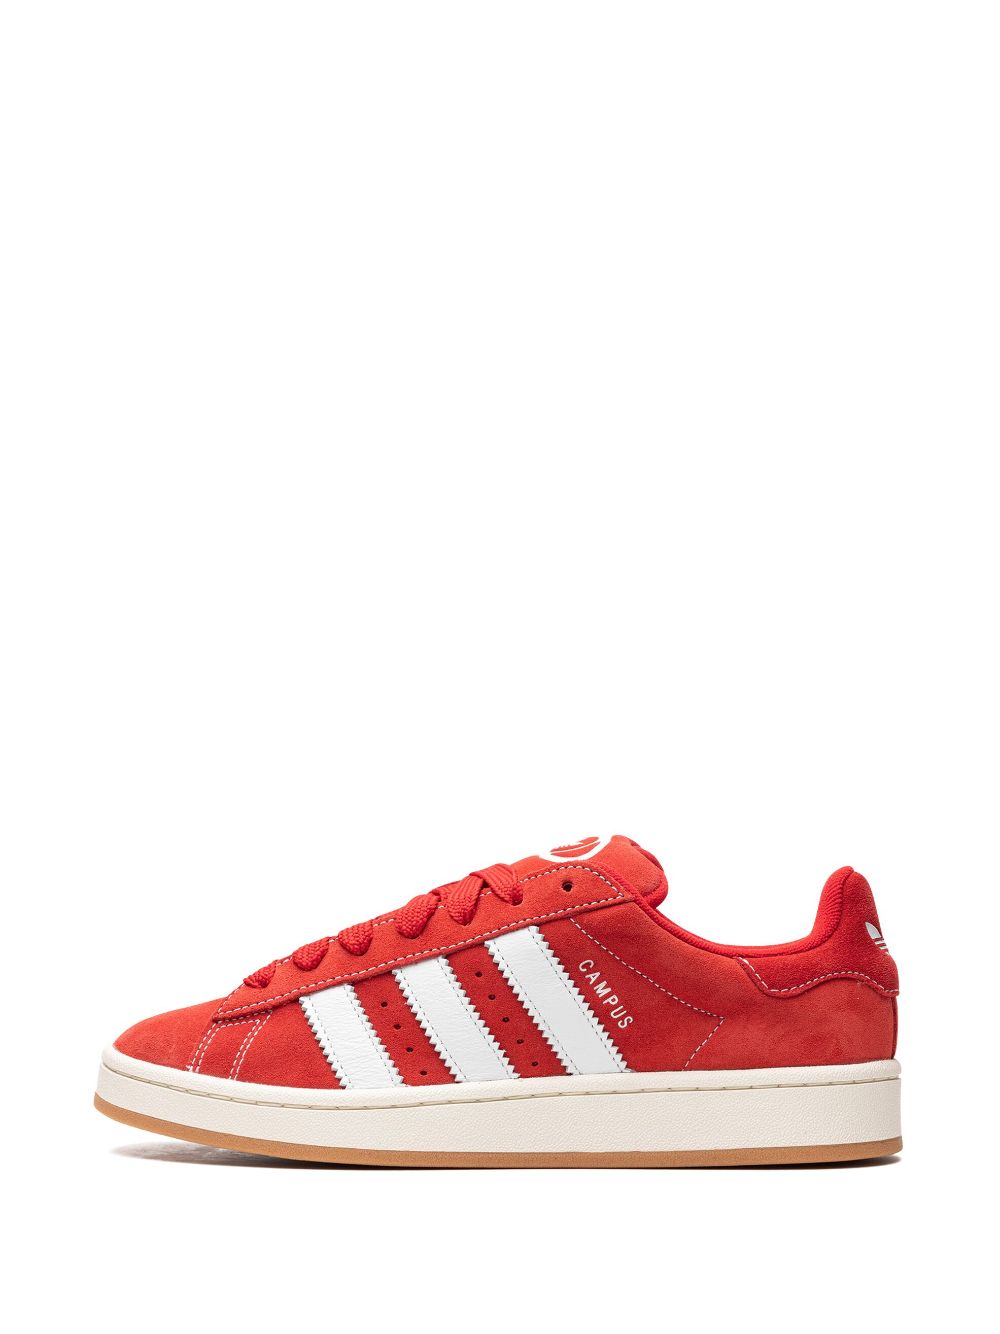 Campus 00s "Better Scarlet/Cloud White" Sneakers - Farfetch